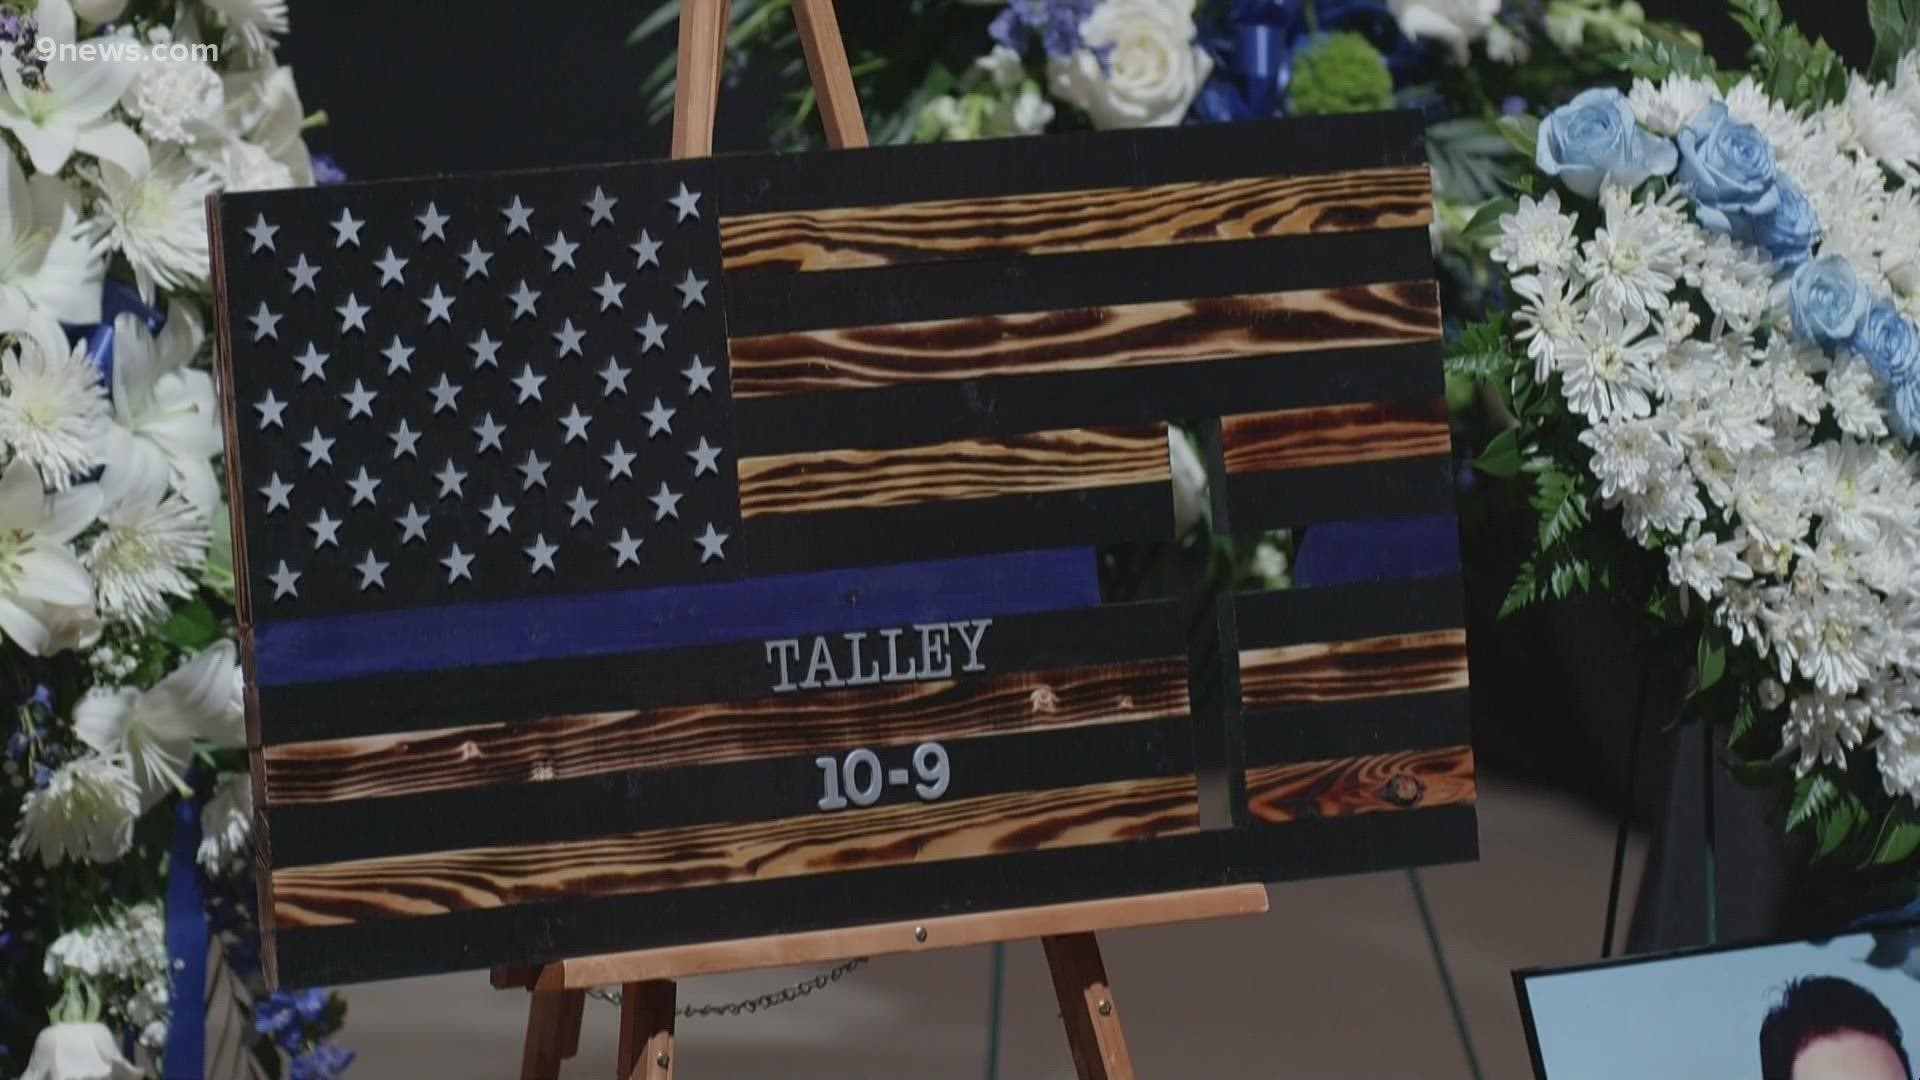 Boulder Police Officer Eric Talley was remembered at a memorial service in Lafayette on Tuesday.